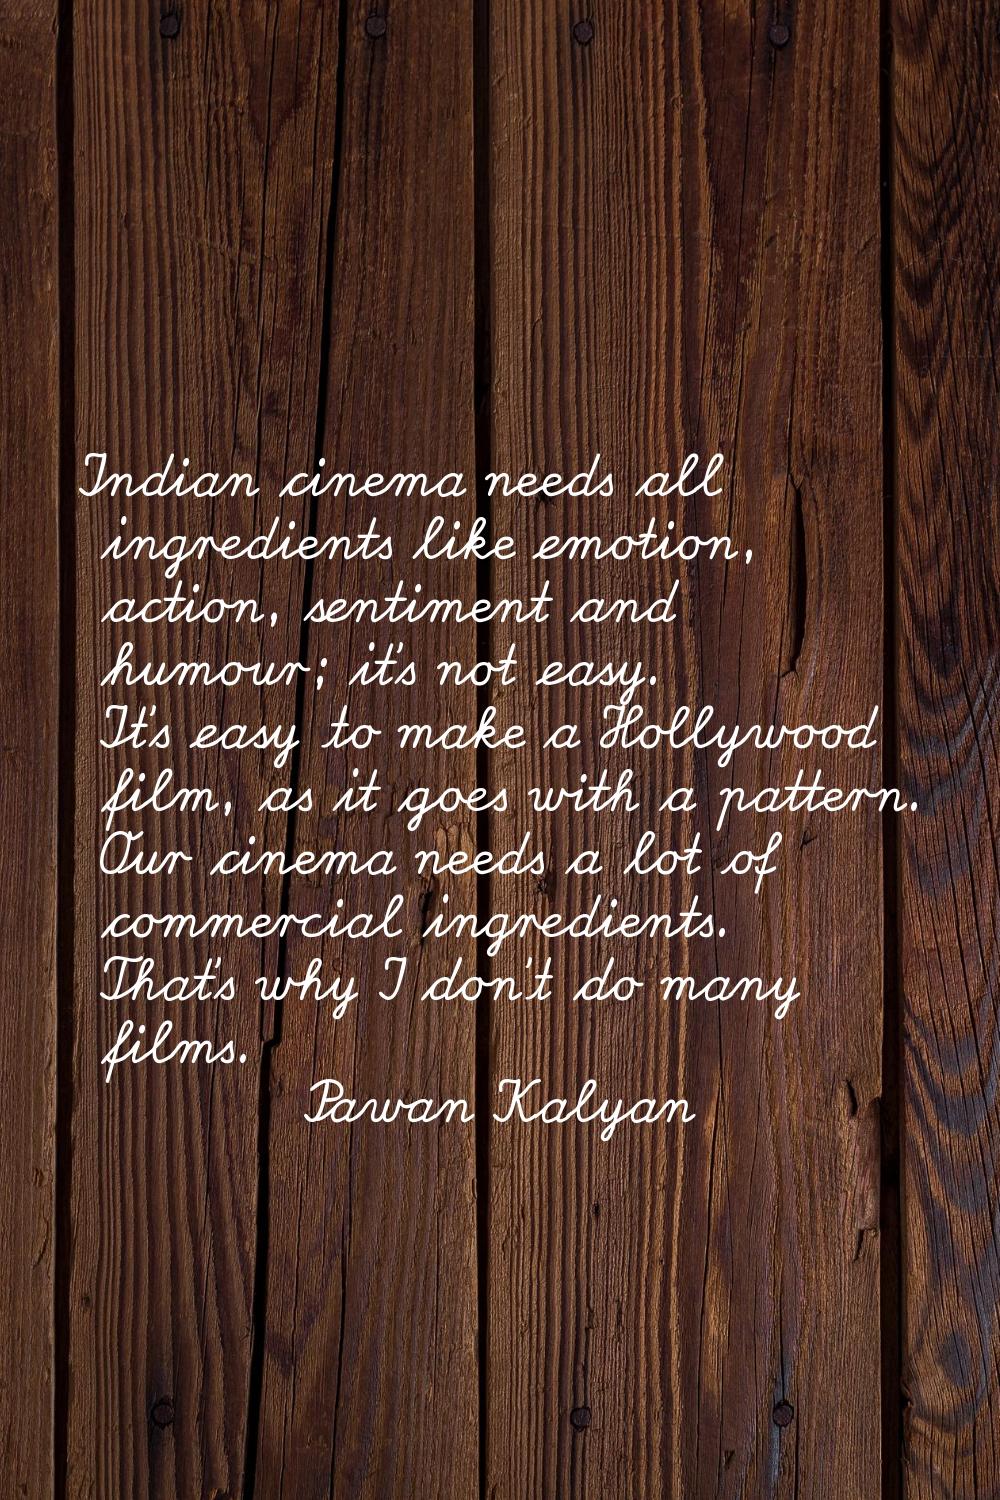 Indian cinema needs all ingredients like emotion, action, sentiment and humour; it's not easy. It's